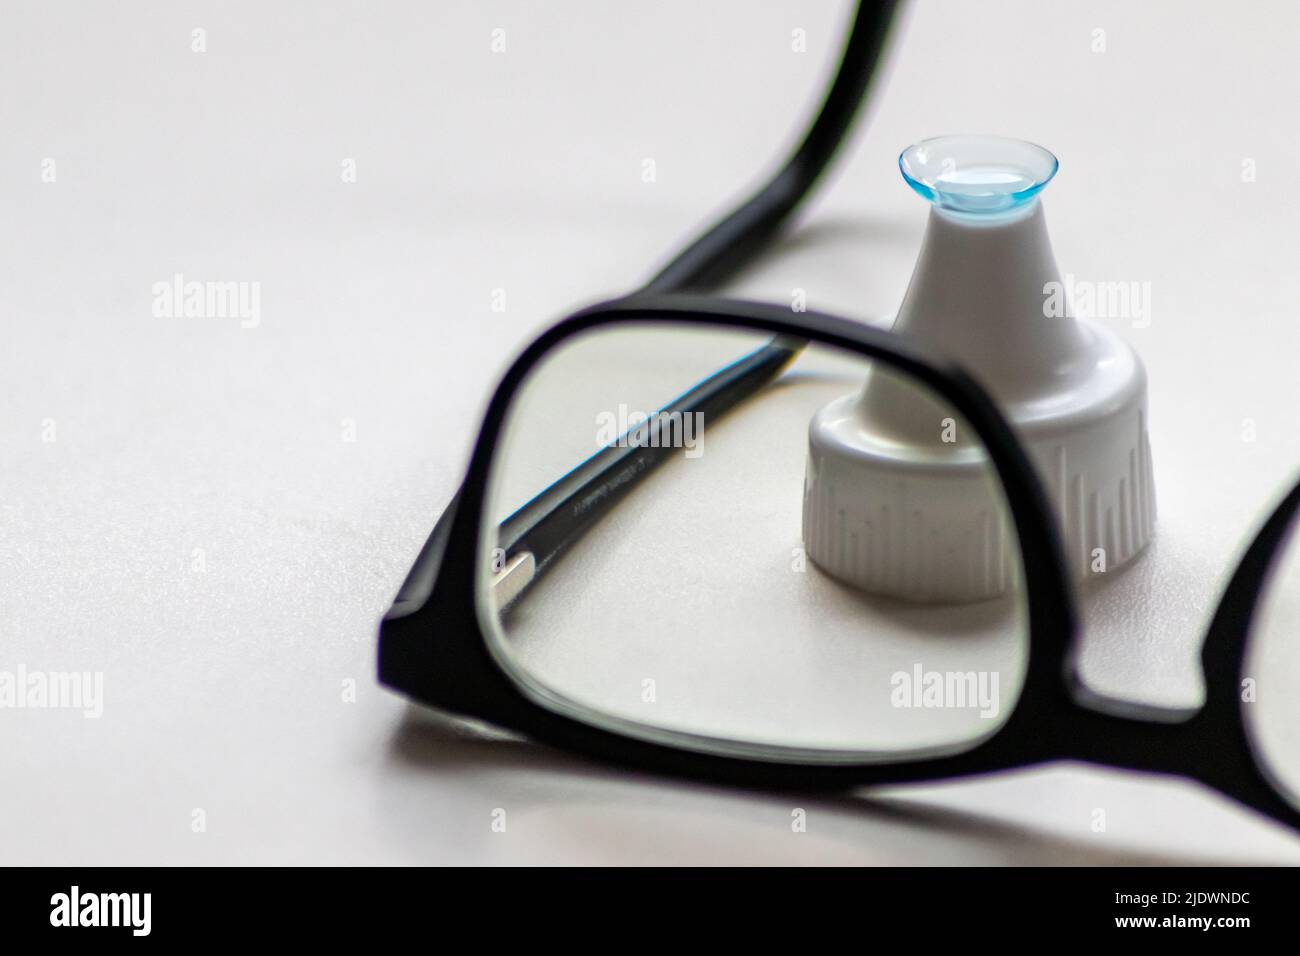 Blue contact lens through black eyeglasses shows different eyewear to correct farsightedness and nearsightedness by optometry or eye doctor myopia Stock Photo